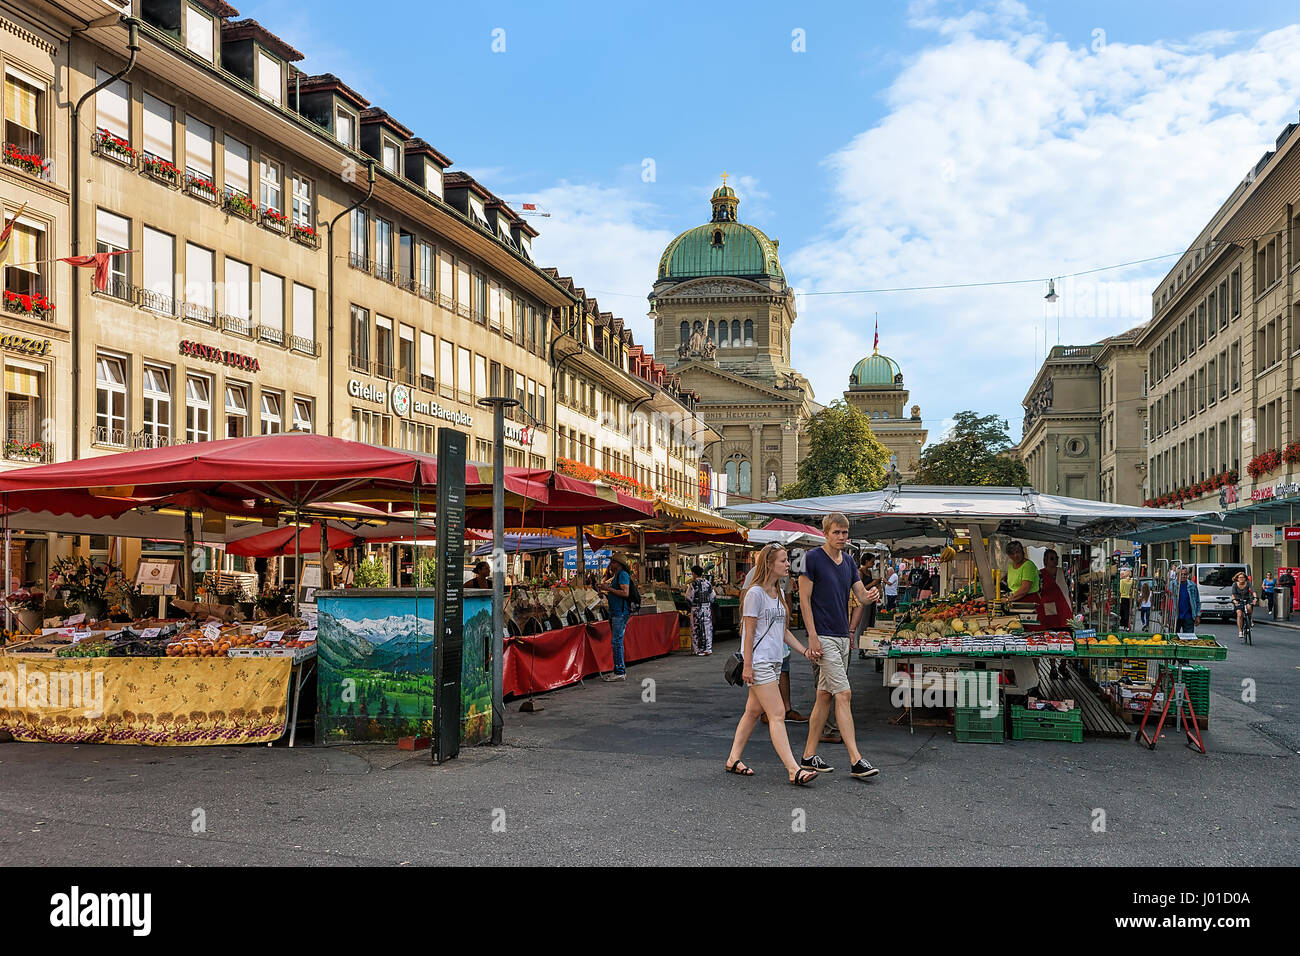 Bern, Switzerland - August 31, 2016: People on the market at Bundesplatz with Swiss Parliament building on the background, in the old city center of B Stock Photo